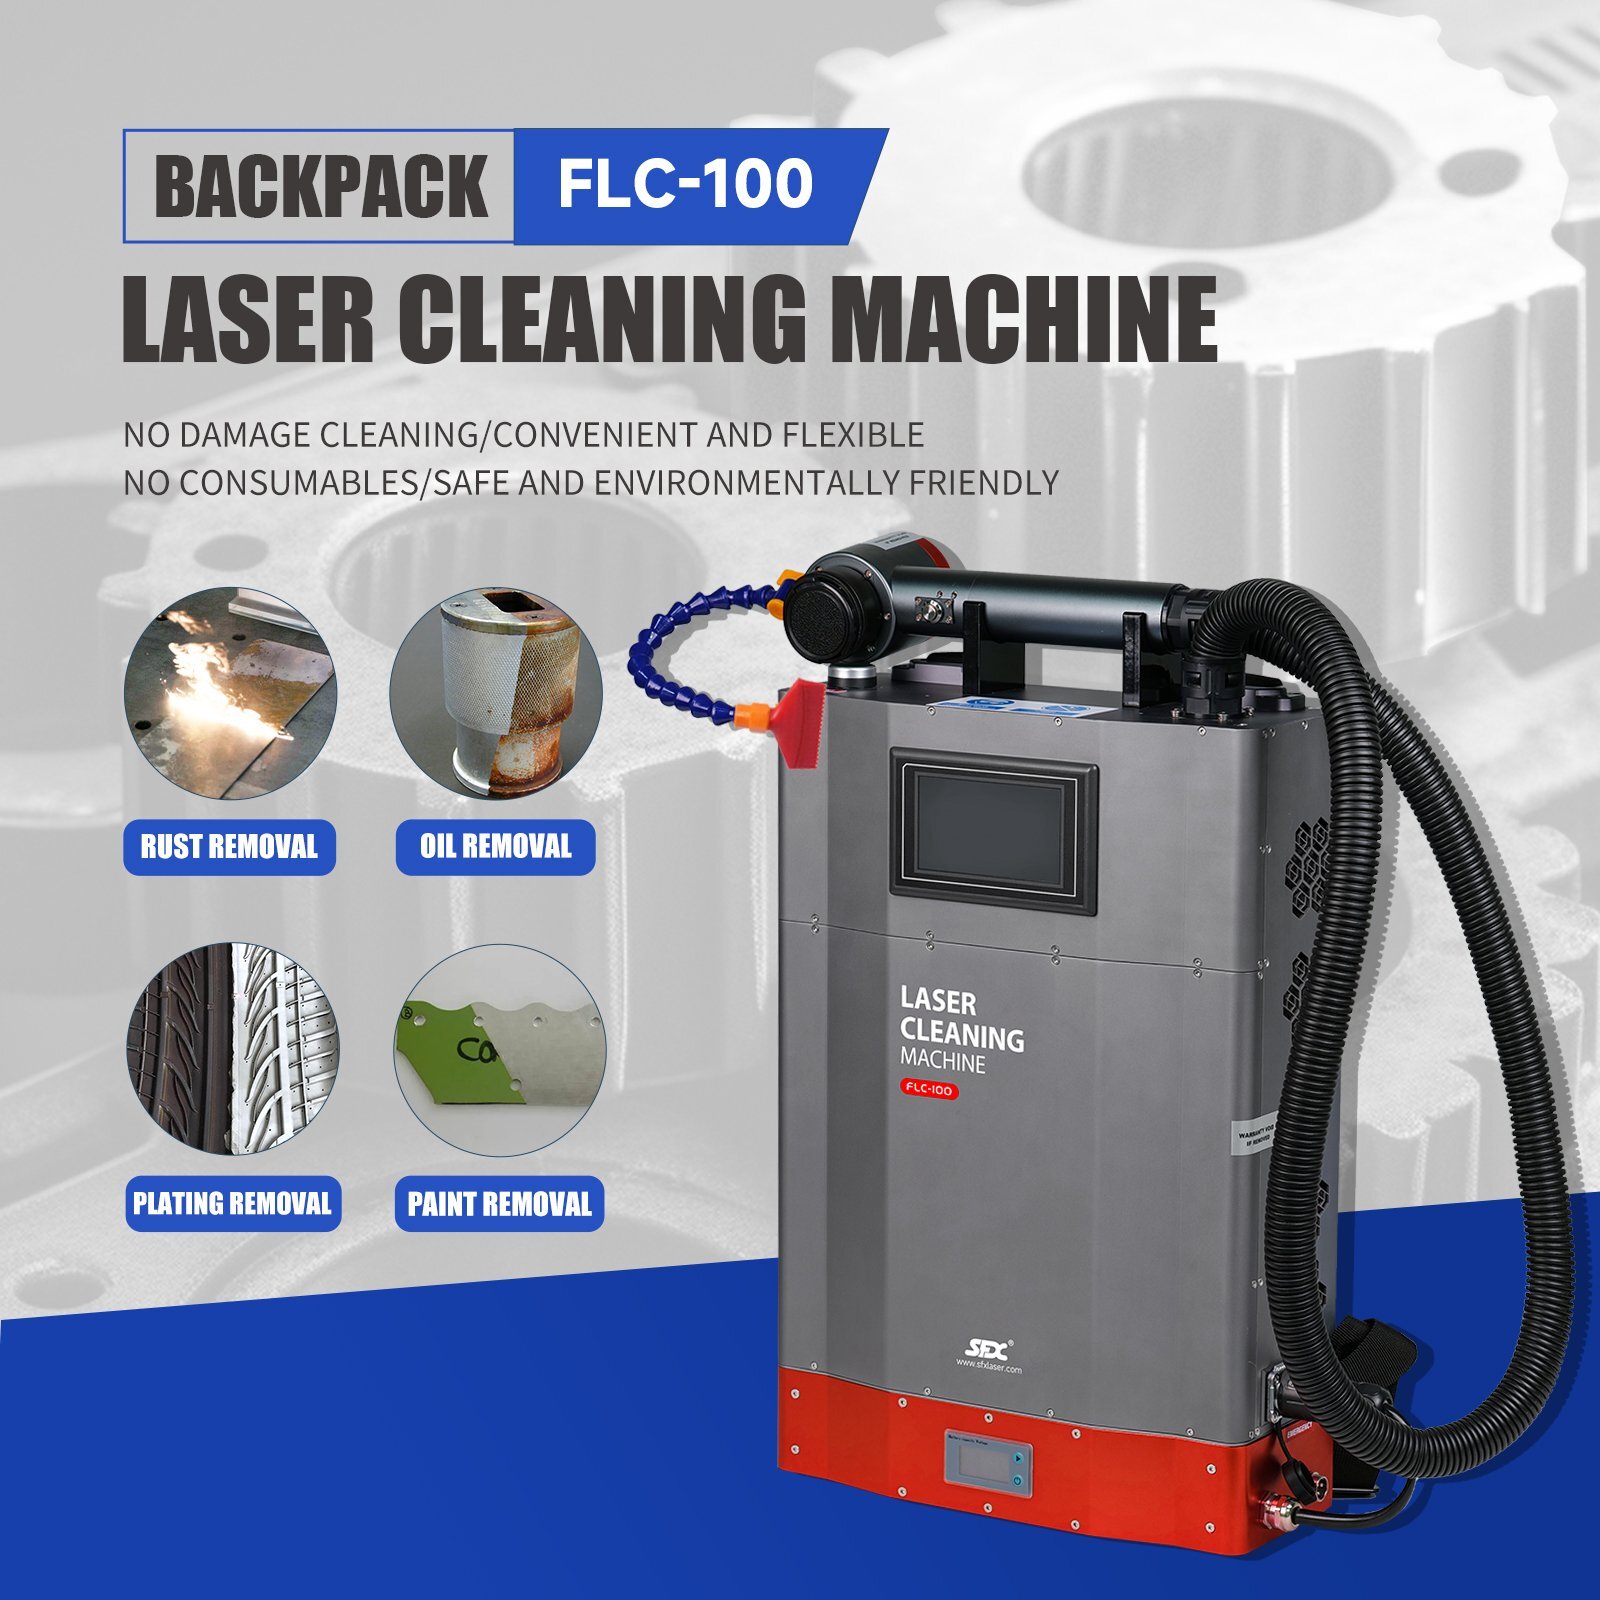 100W Backpack Portable Laser Cleaning Rust Removal Machine Manufacturers  and Suppliers China - Cheap, Low Price - MRJ-Laser